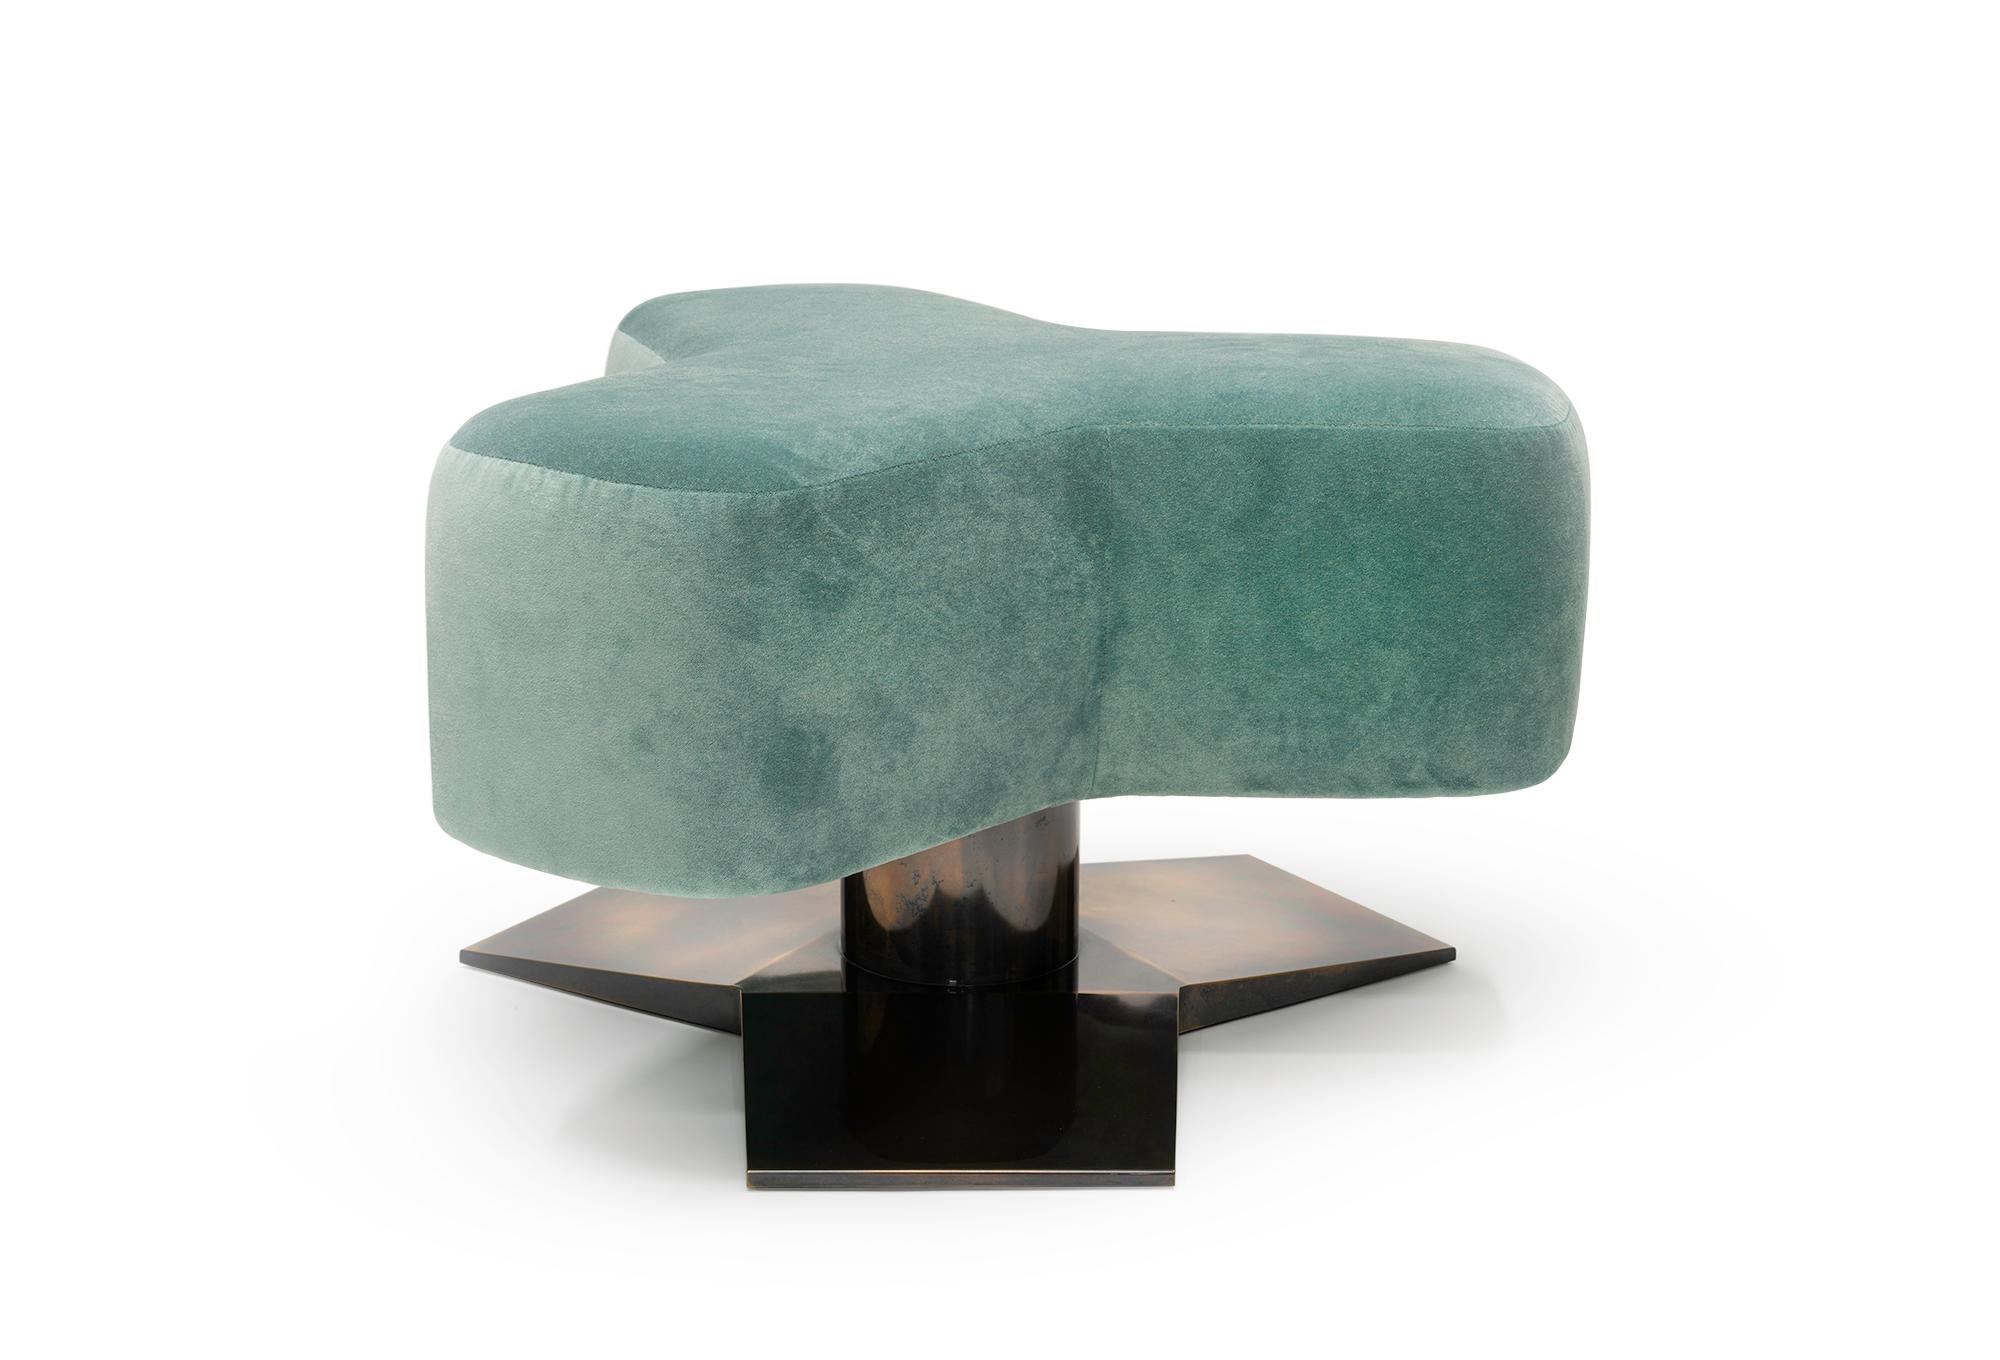 Tripod, 21st century modern Y- shaped velvet and brass pouf ottoman

Simple yet statement piece, TRIPOD POUF is a pleasant and standing out flirter addition to your interior. Unusual, yet regular shaping of its velvet seat is complemented by the